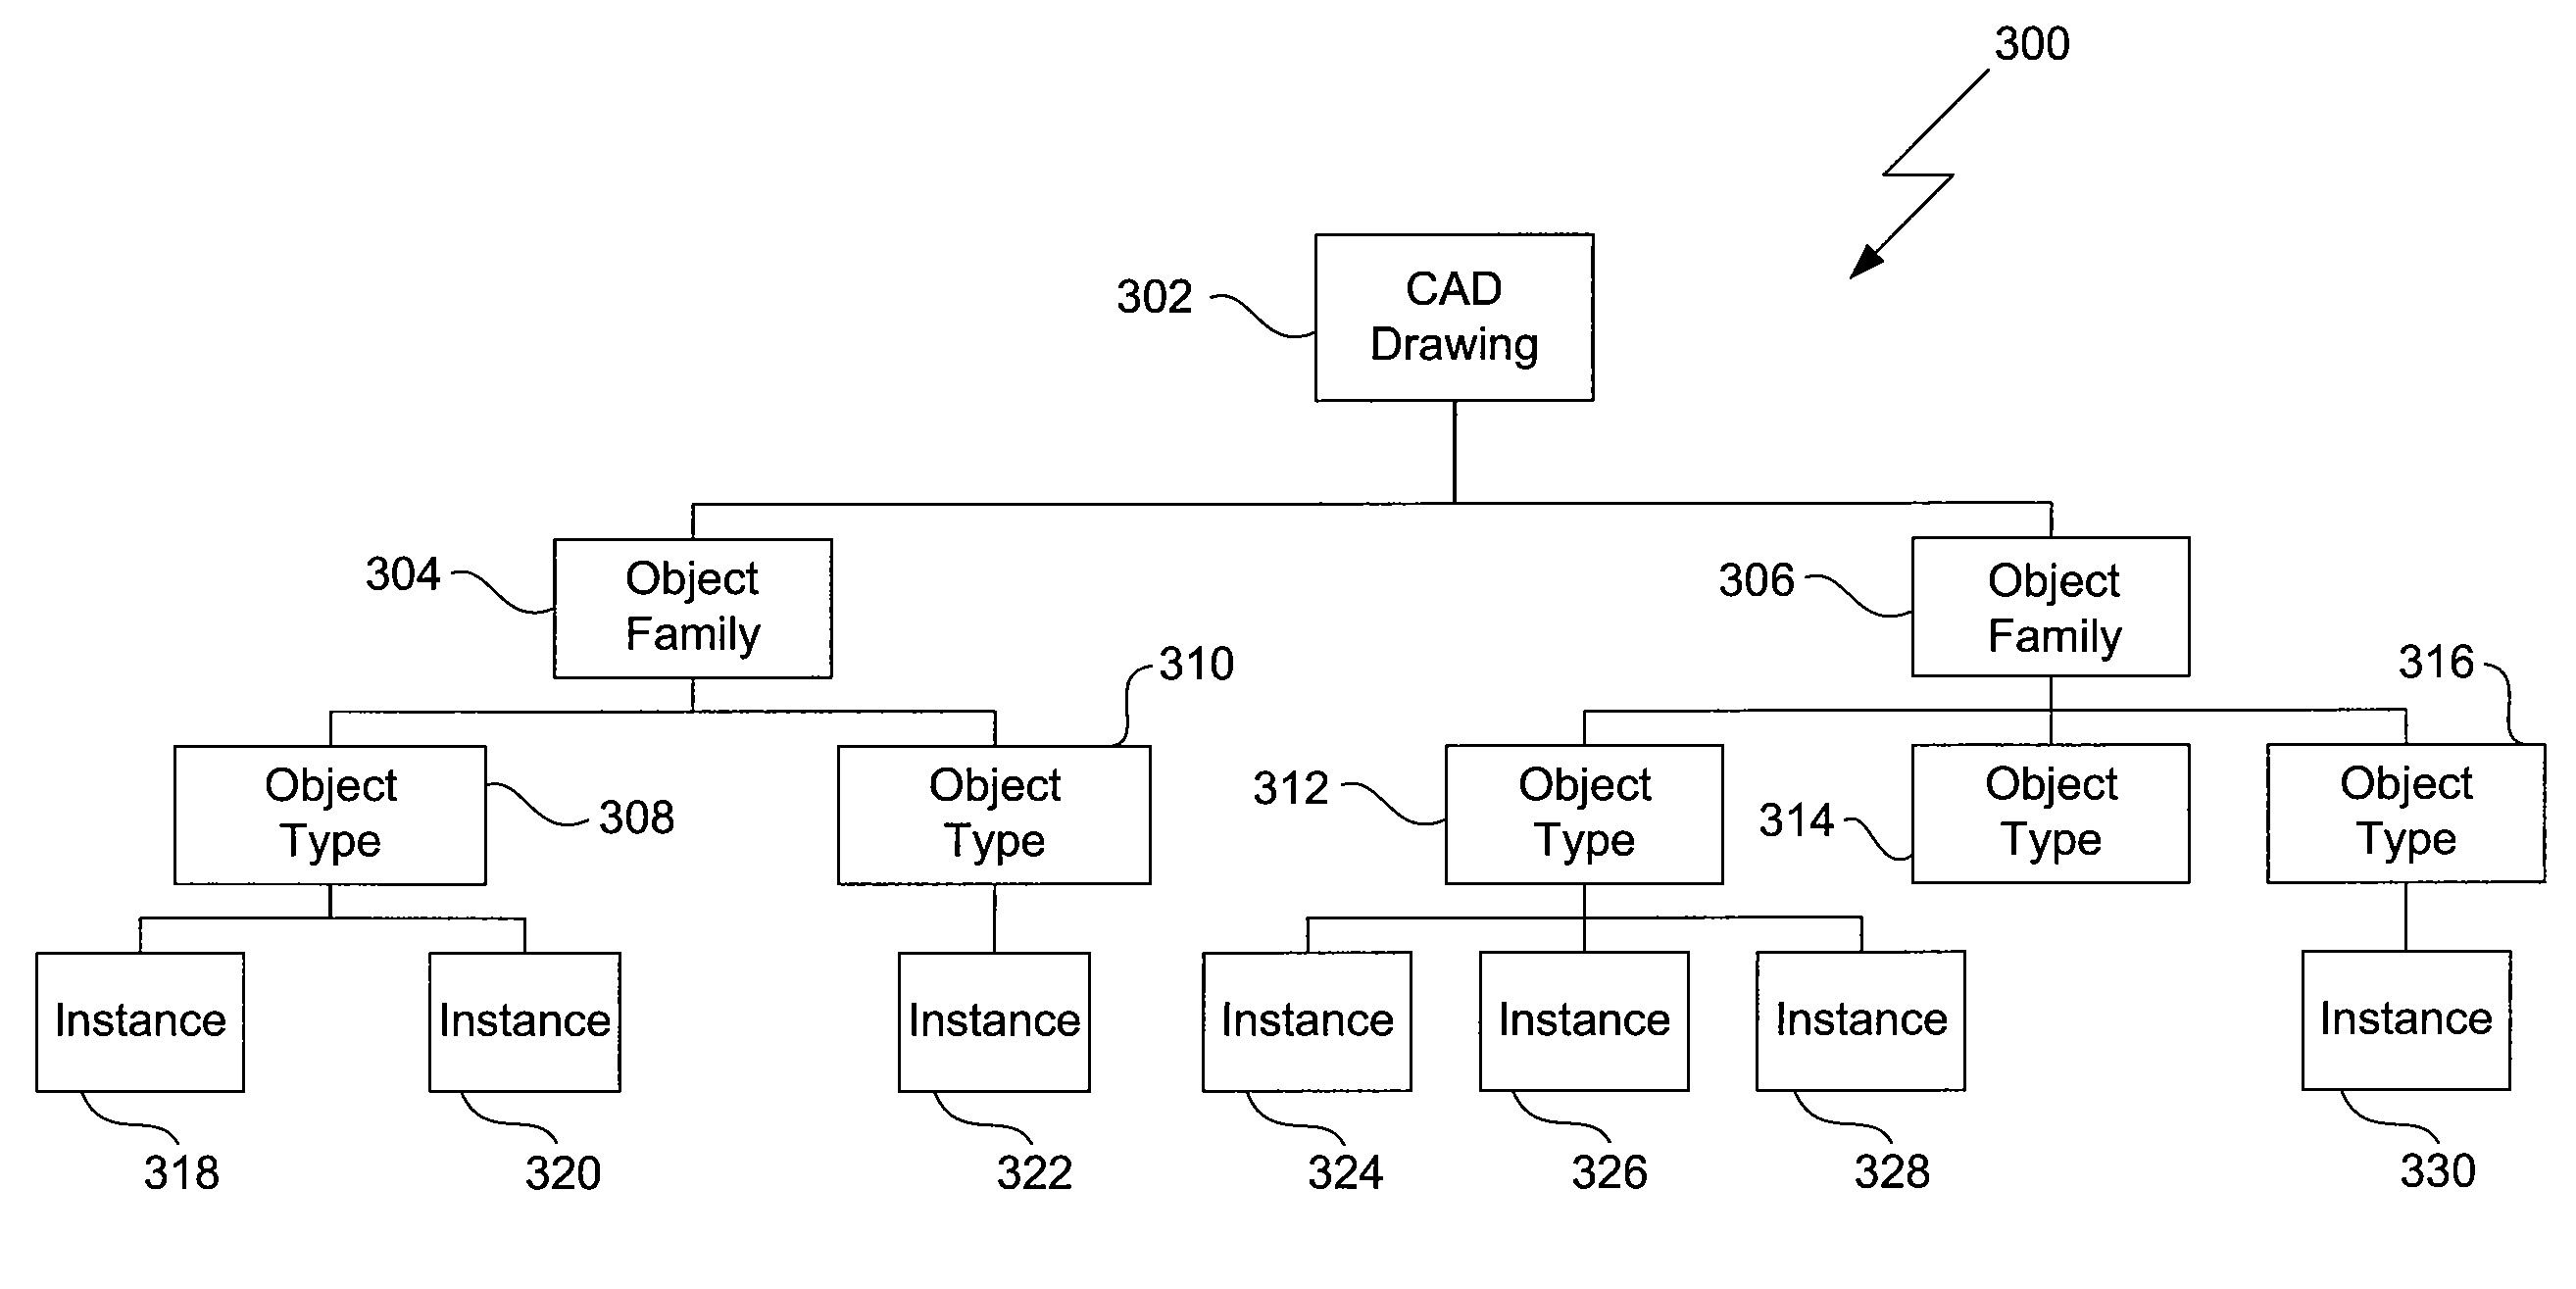 Selective quantity takeoff from computer aided design drawings